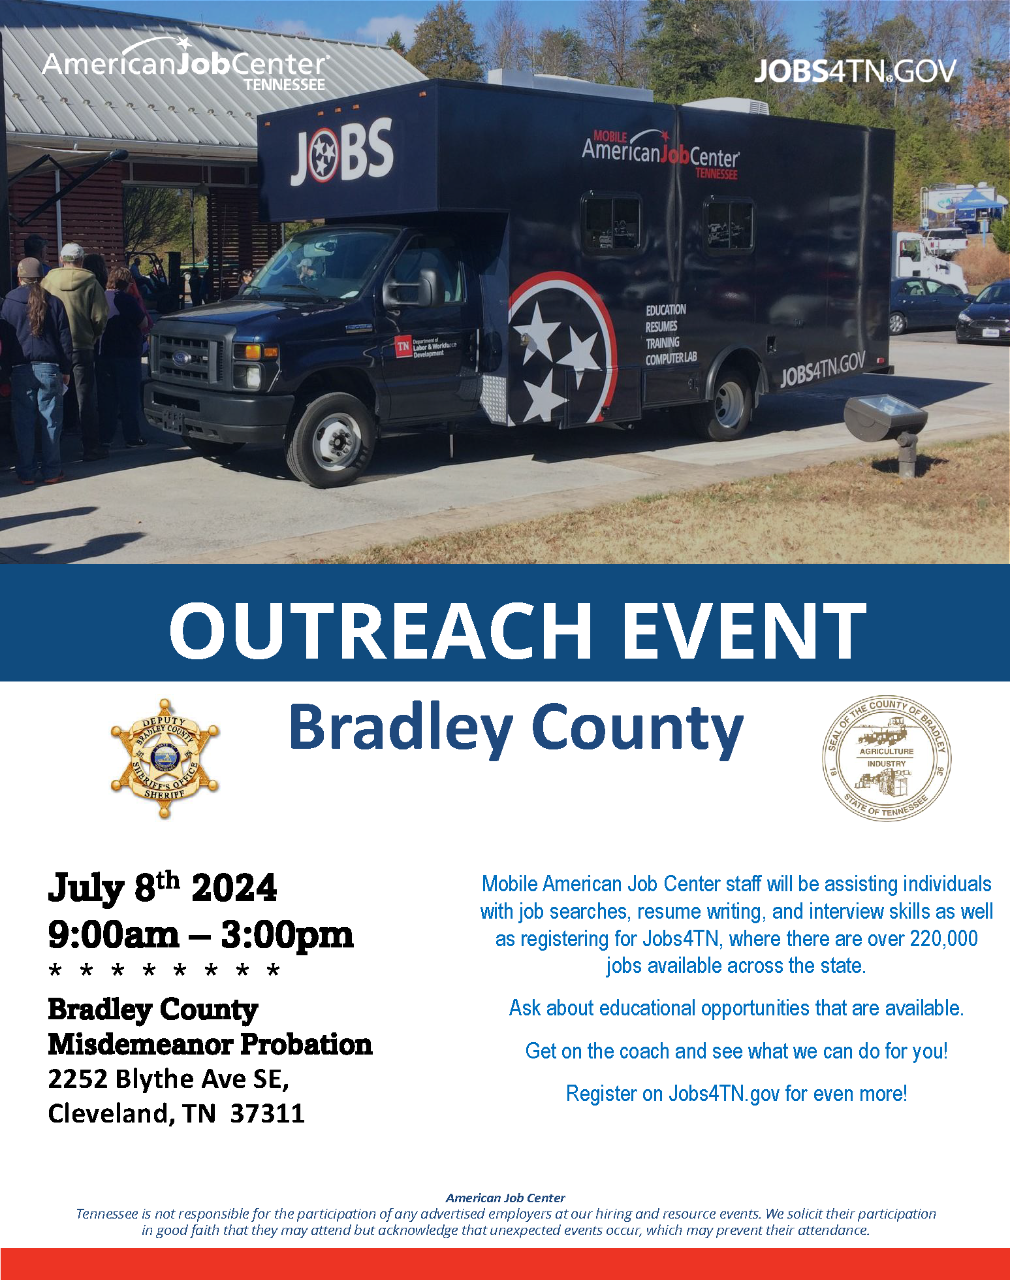 The Outreach Event in Bradley County is July 8, 2024